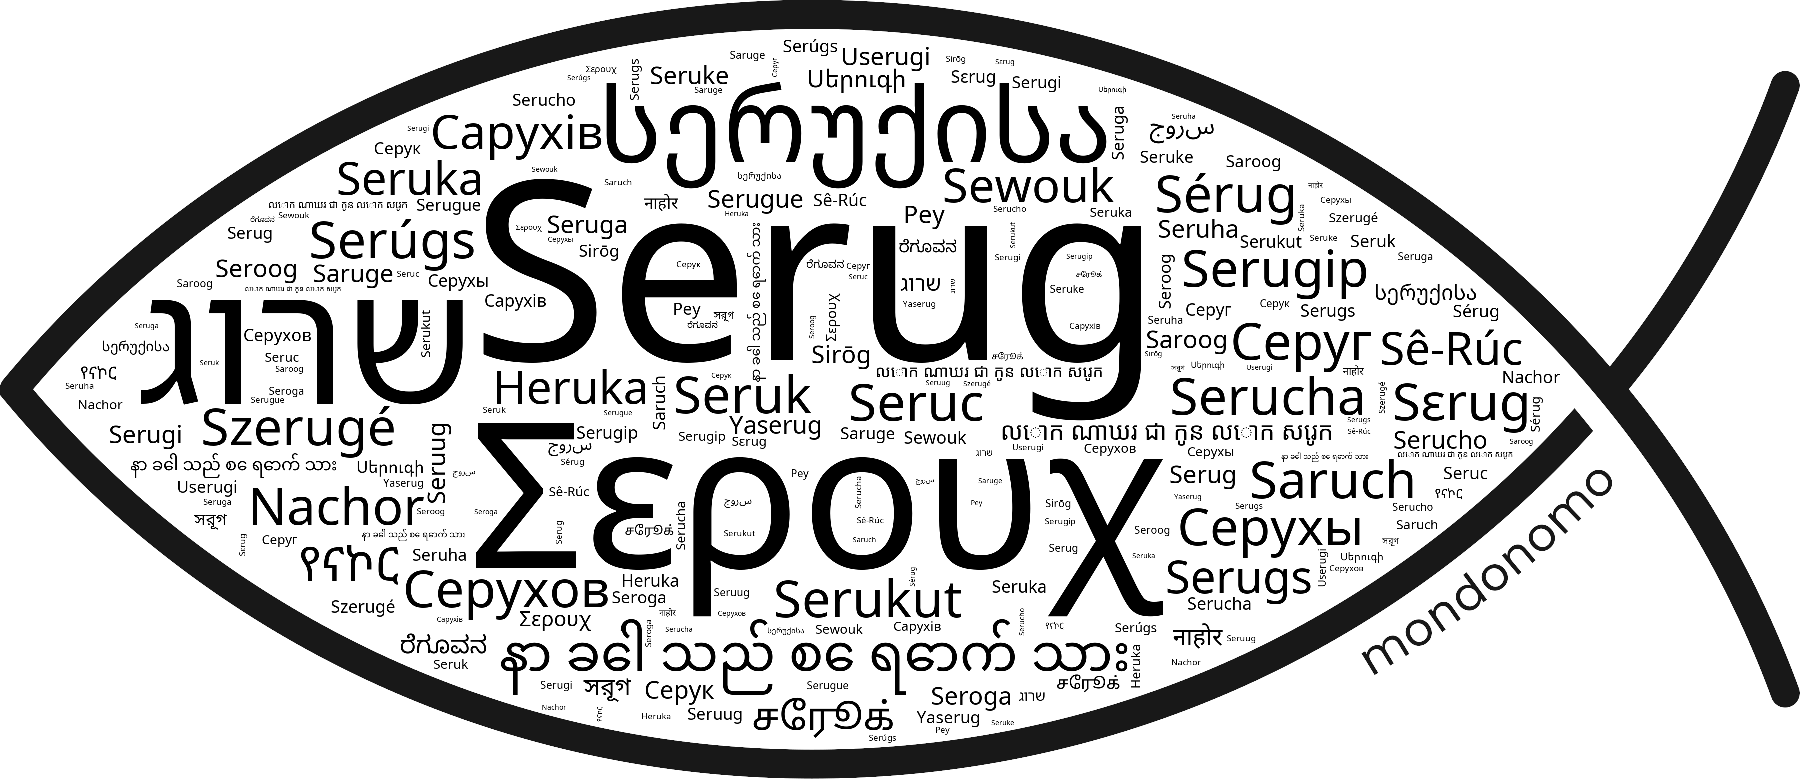 Name Serug in the world's Bibles